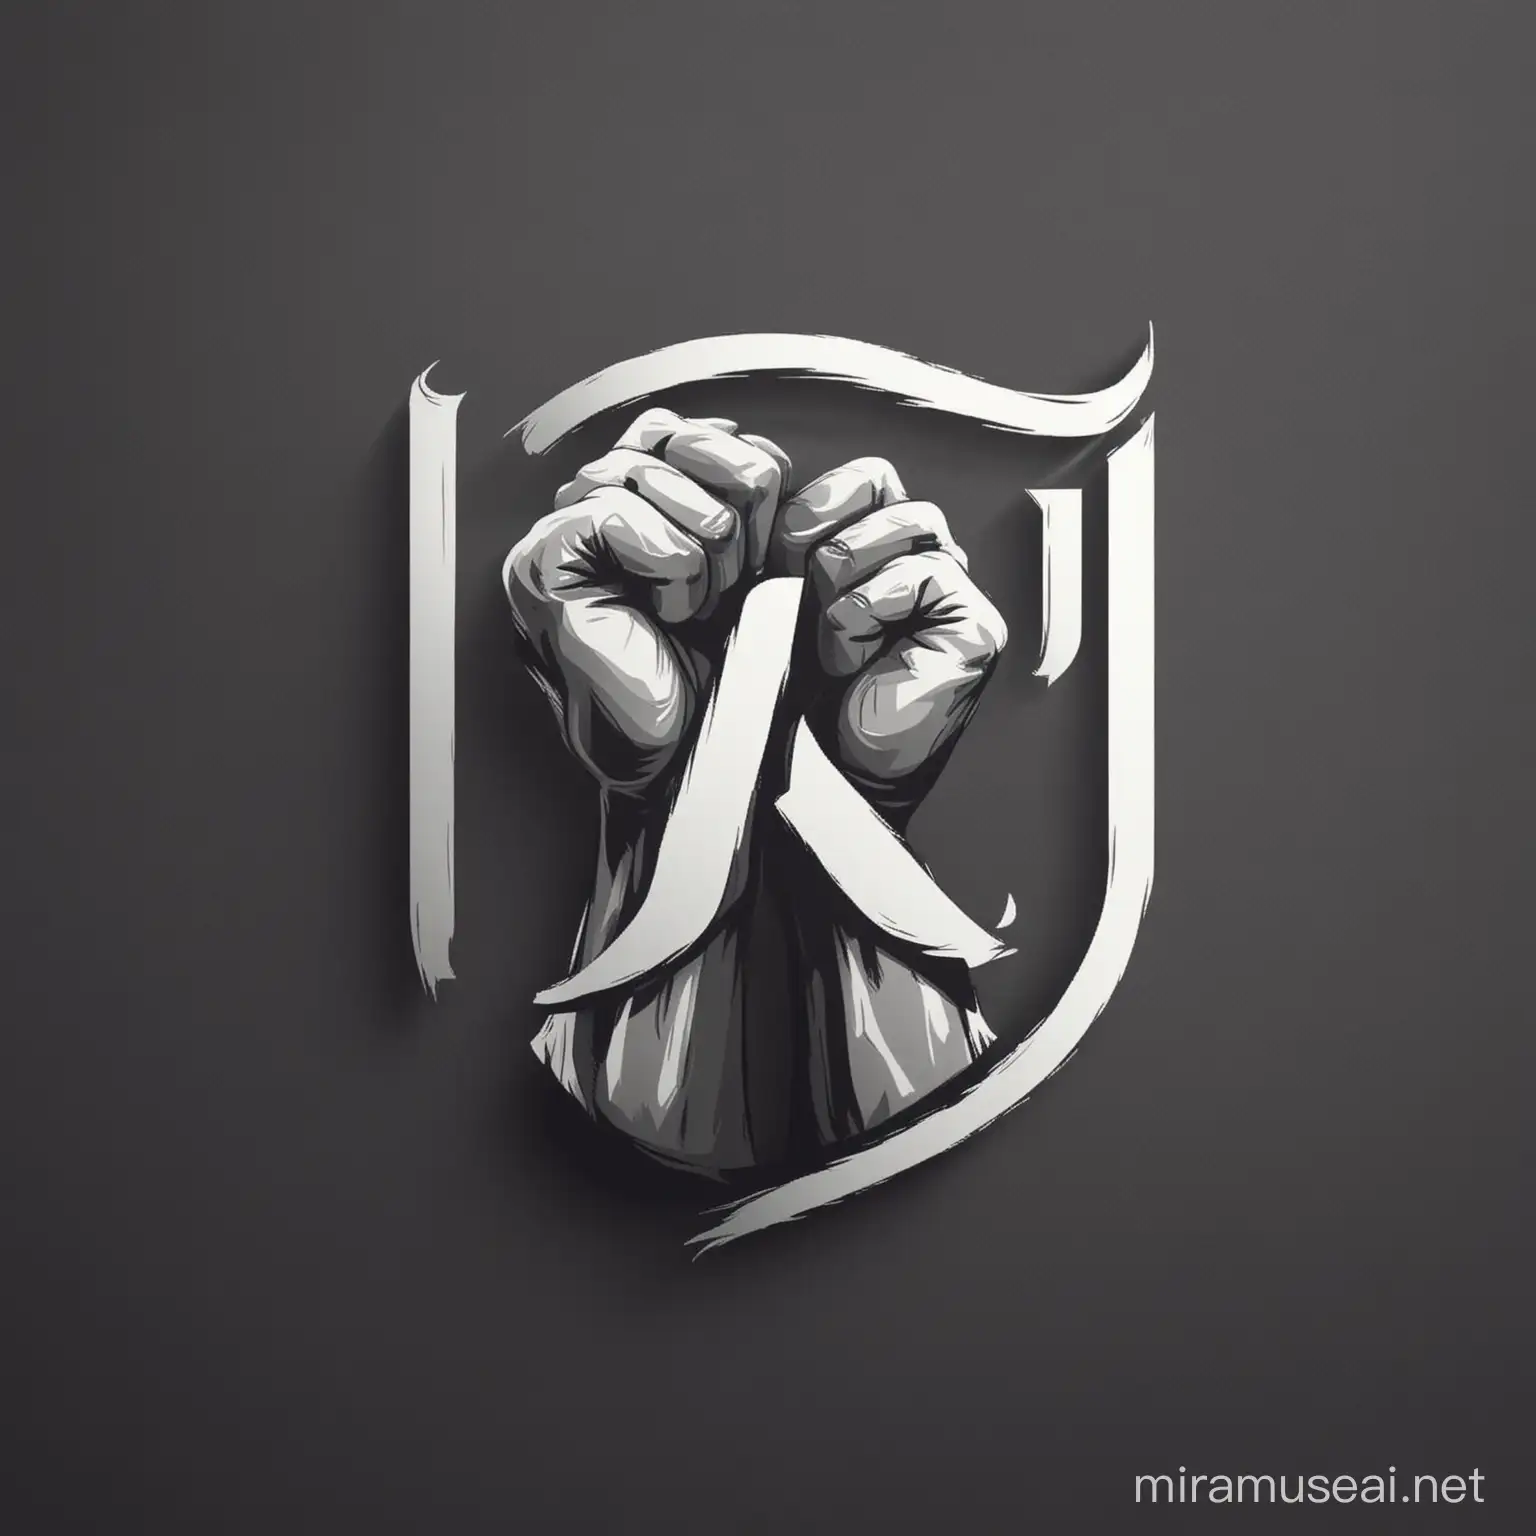 Unity Symbol Logo with Intertwined Letter U and Fist